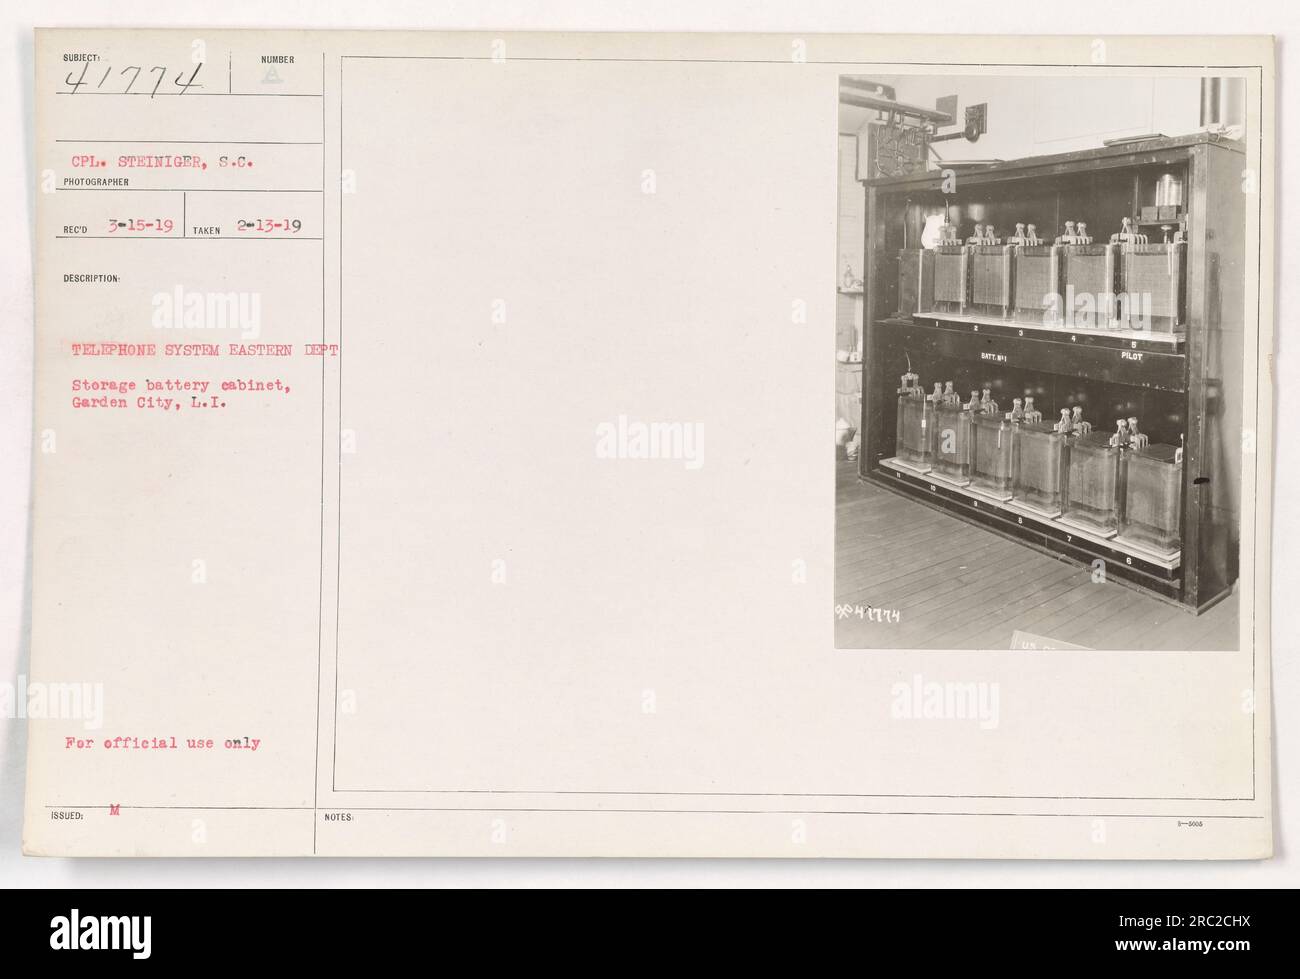 Cpl. Steiniger, S.C. photographer, captures an image of a storage battery cabinet used for the telephone system in the Eastern Department. The location is at Garden City, Long Island. The cabinet is designated for official use only. This photograph is a Record Copy taken on February 13th, 1919, with the description number 41774. Stock Photo